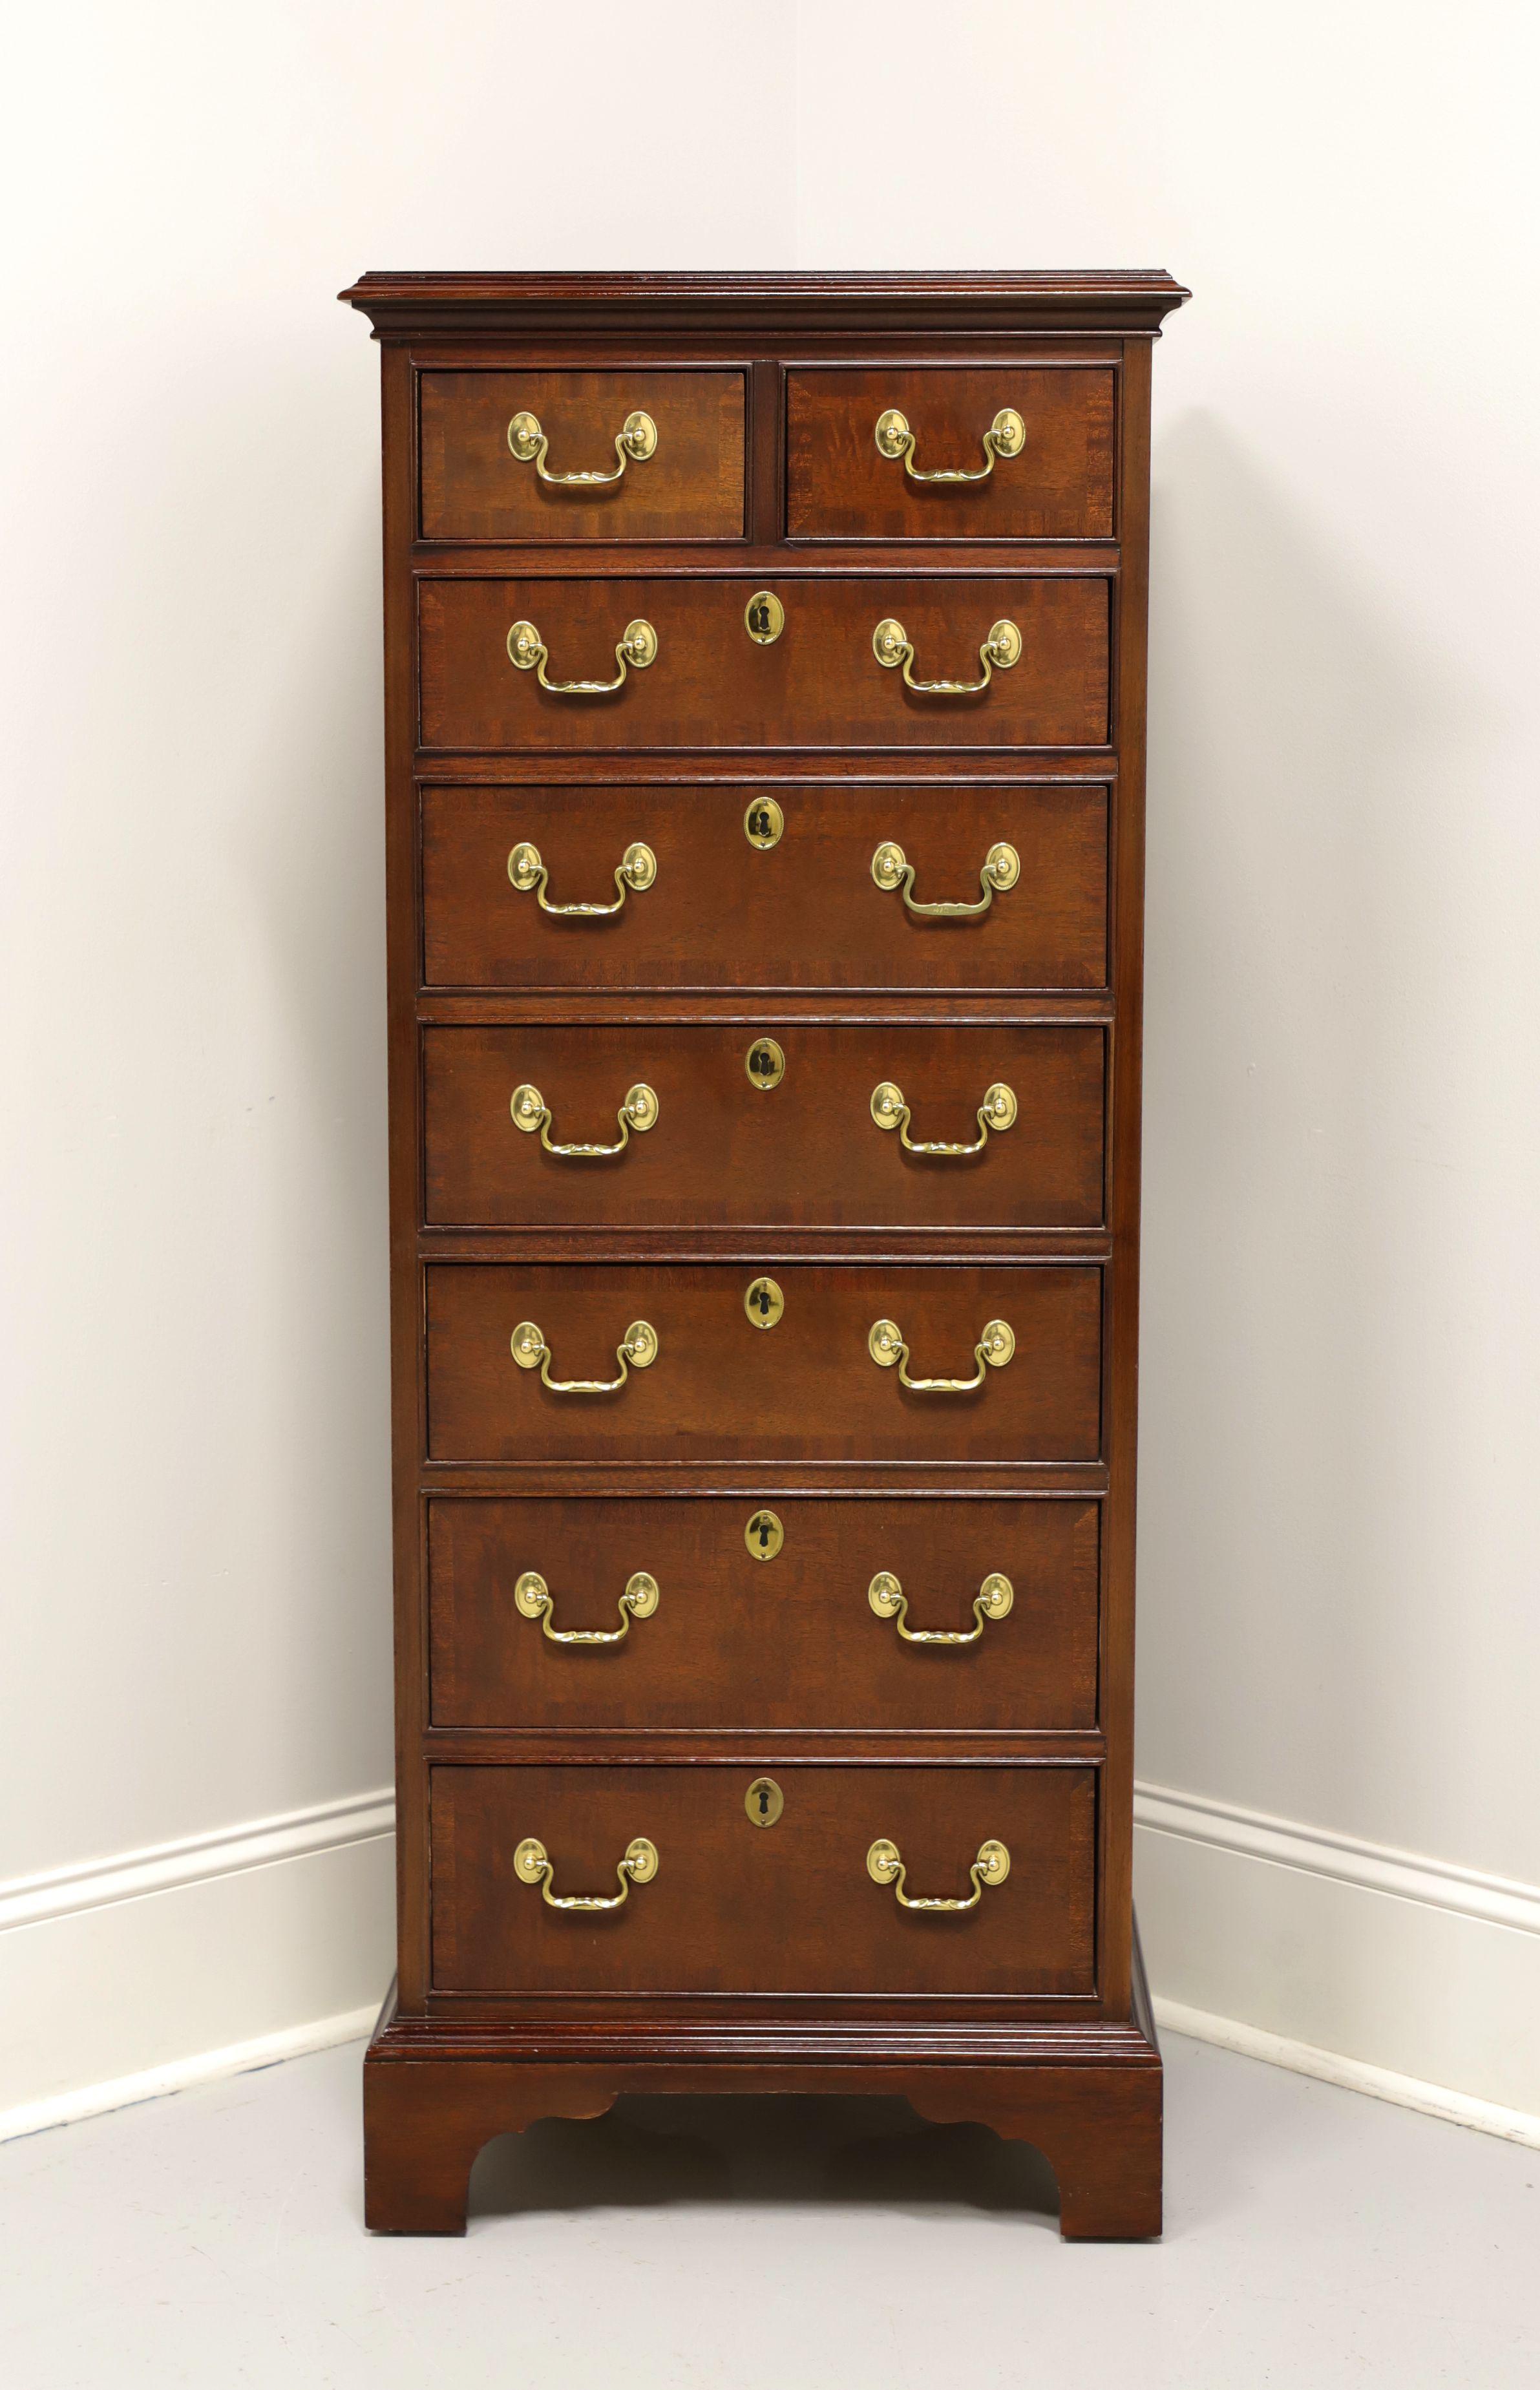 A Chippendale style lingerie chest by Councill Craftsmen. Solid mahogany with banded drawer fronts, brass hardware and bracket feet. Features two smaller over six larger dovetail drawers with faux keyhole escutcheons. Made in North Carolina, USA, in